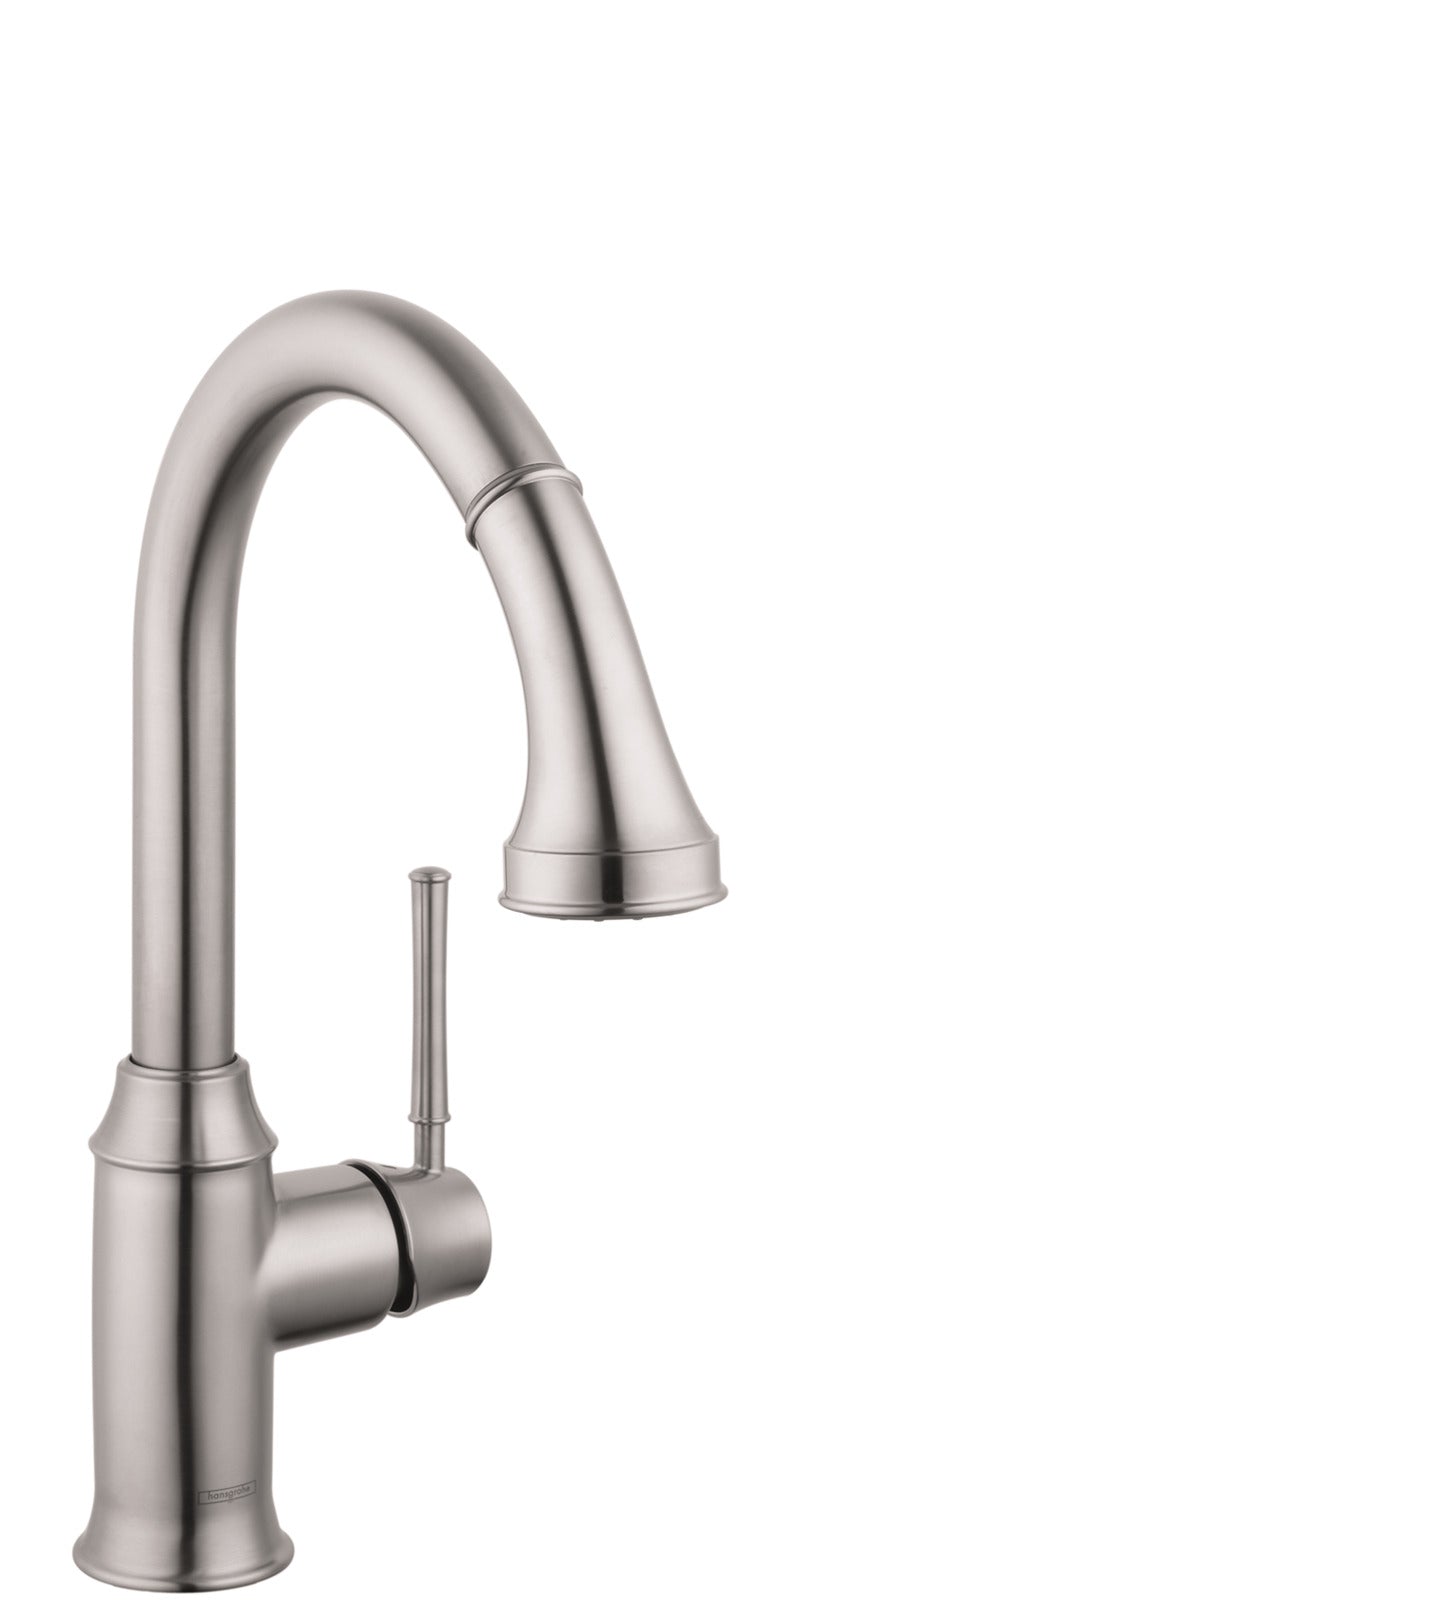 HANSGROHE 04215800 Stainless Steel Optic Talis C Classic Kitchen Faucet 1.75 GPM